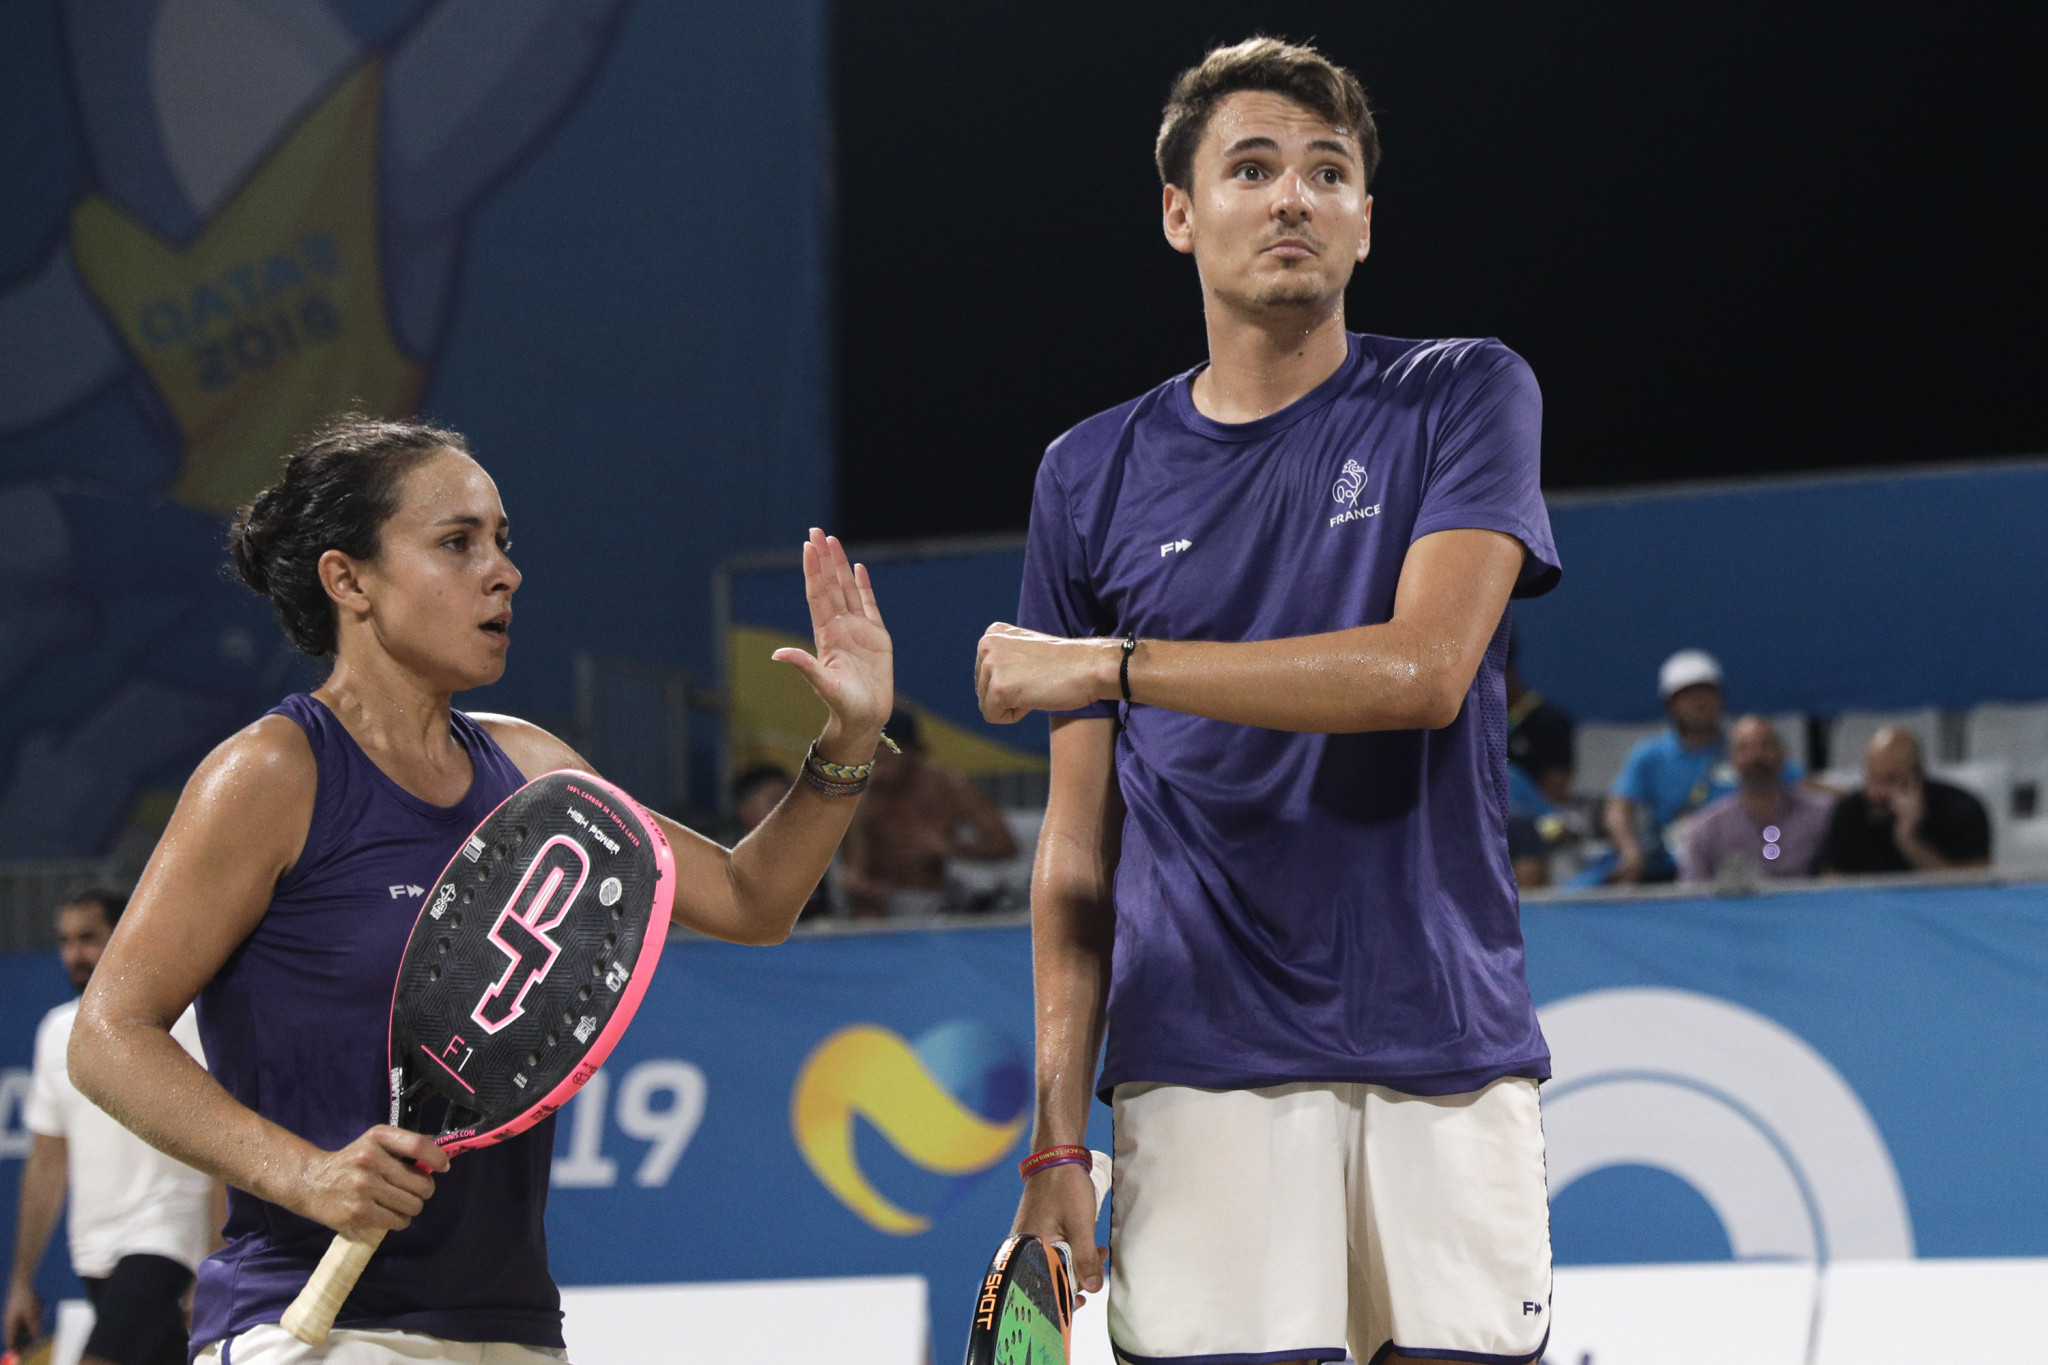 France's Nicolas Gianotti and Marie Eve Hoarau  lost 6-1, 6-1 to Brazil's Rafaella Miiller and Andre Baran in tonight's mixed doubles beach tennis final at the ANOC World Beach Games ©ANOC World Beach Games